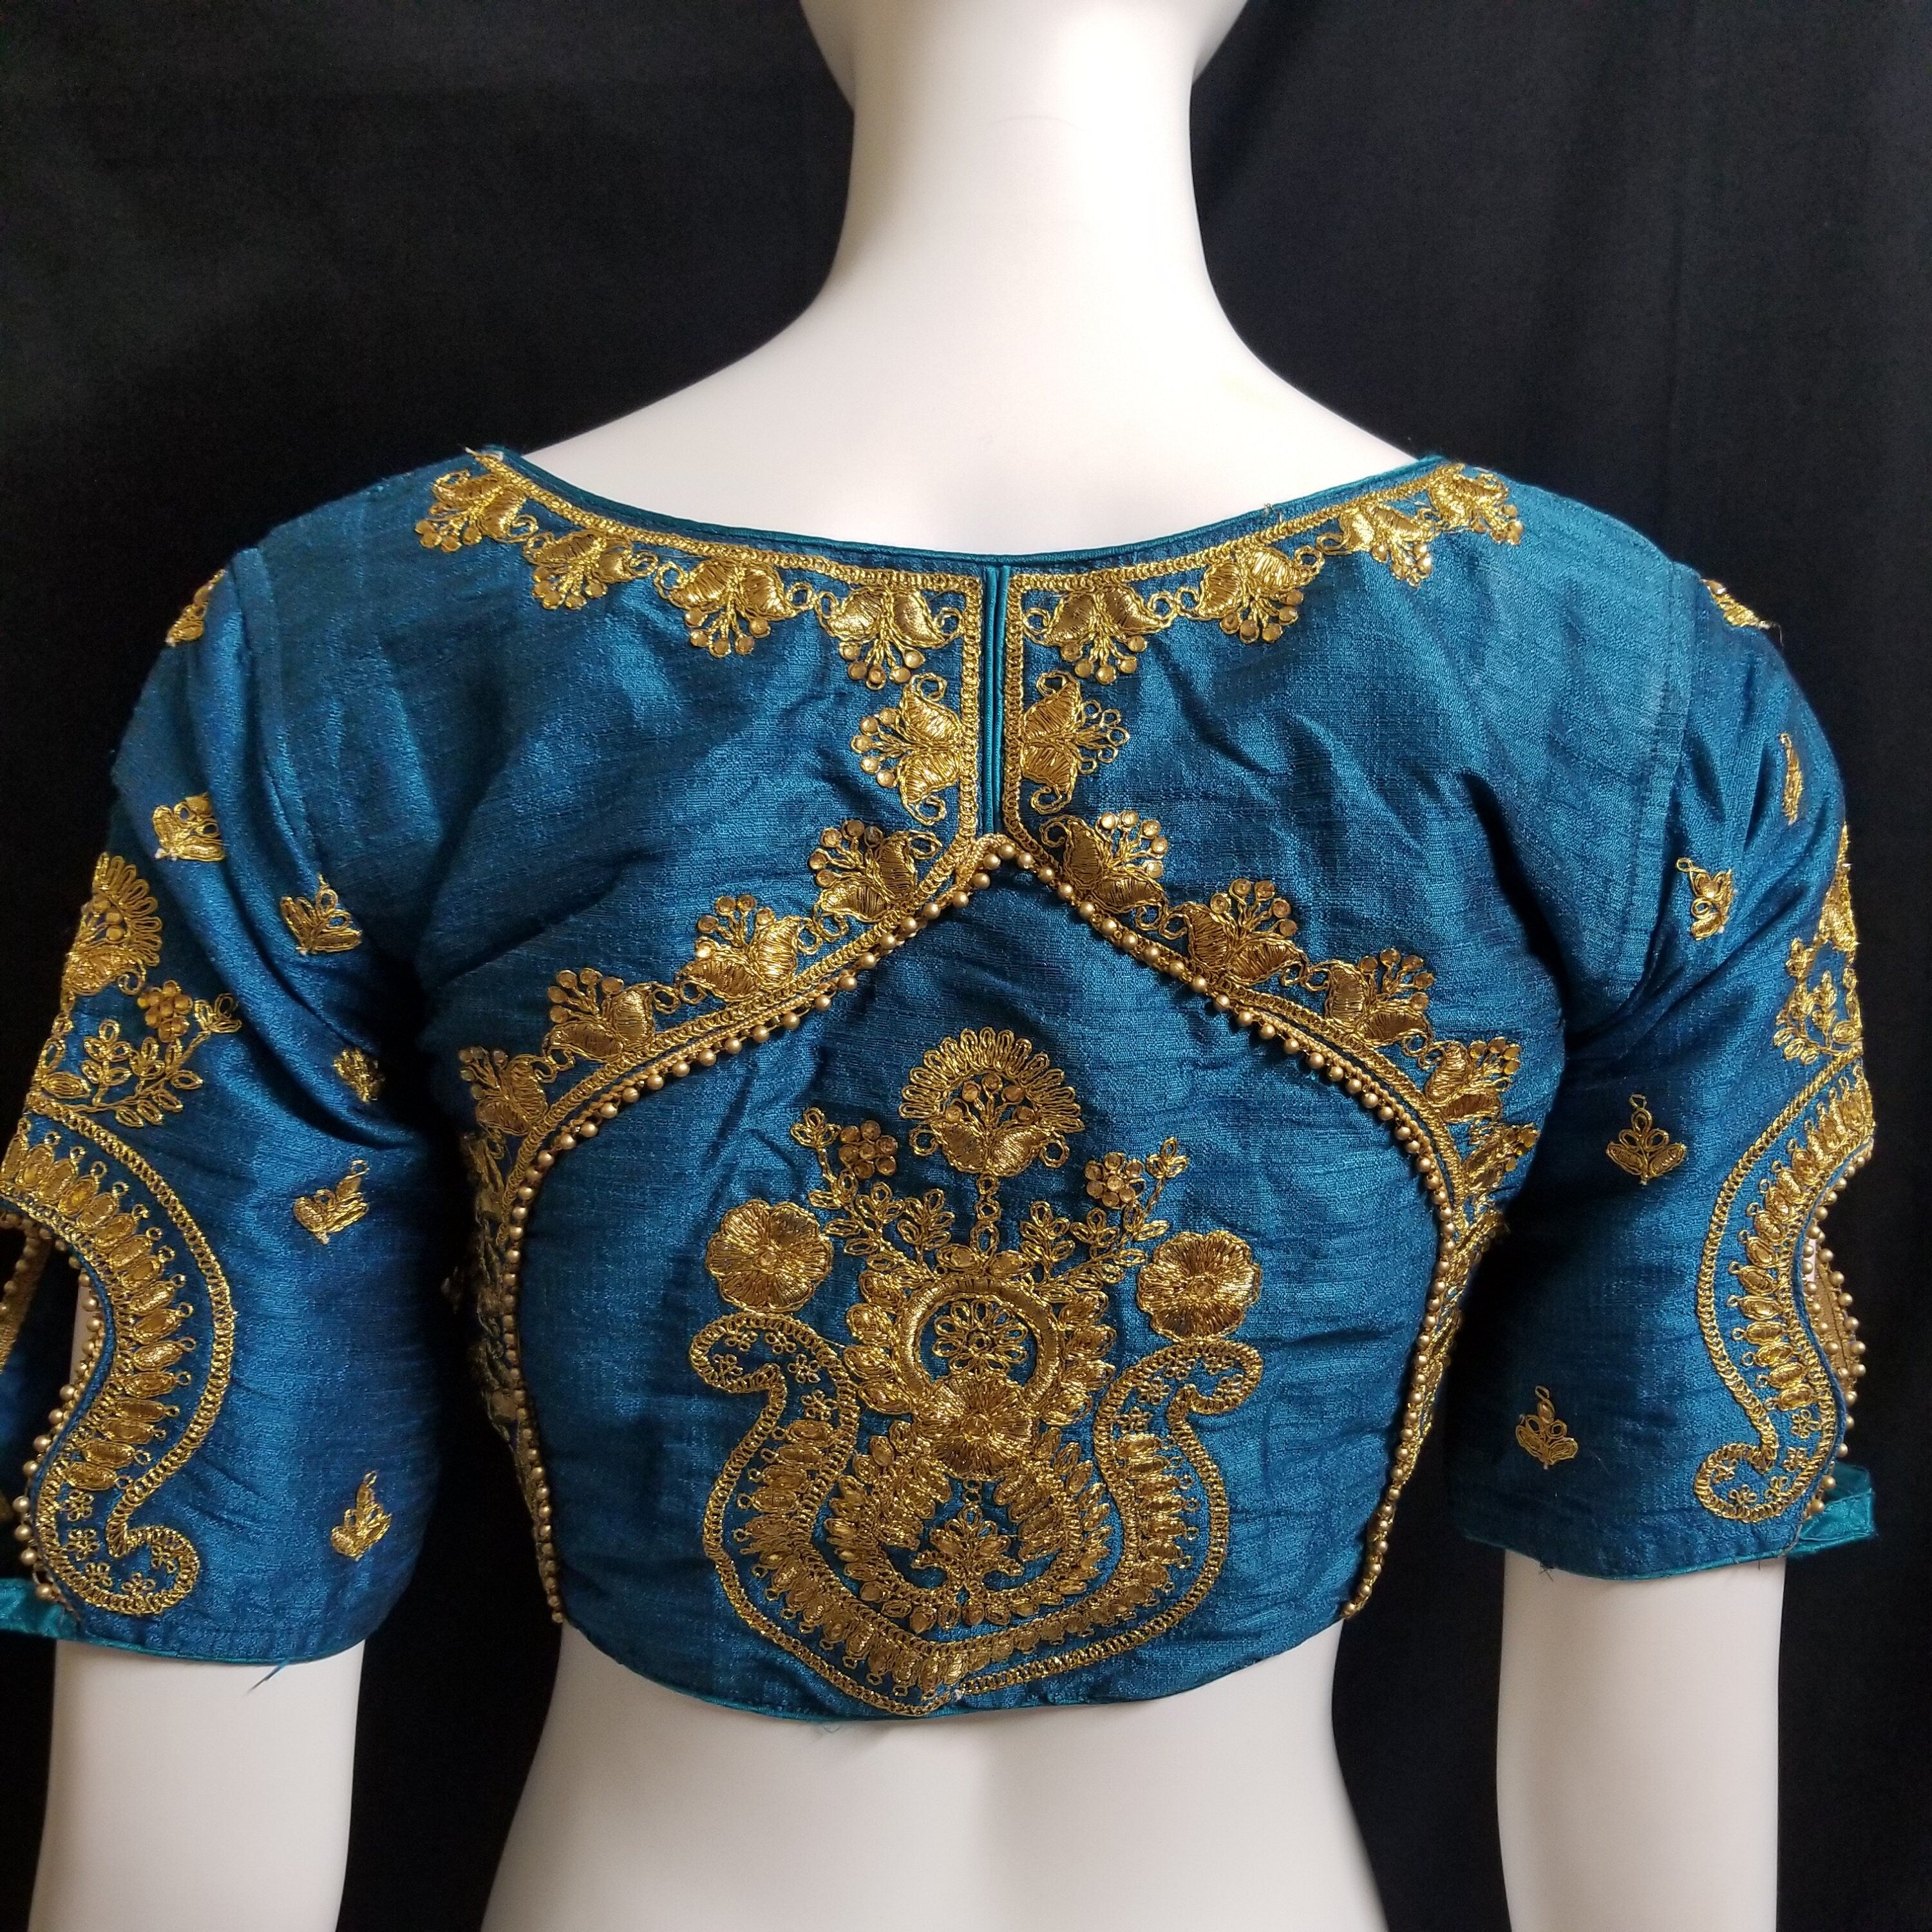 Readymade Saree Blouse - Peacock blue Color Embroidery work Silk base Blouse (with pad) - Size 38 (can alter 36, 40)